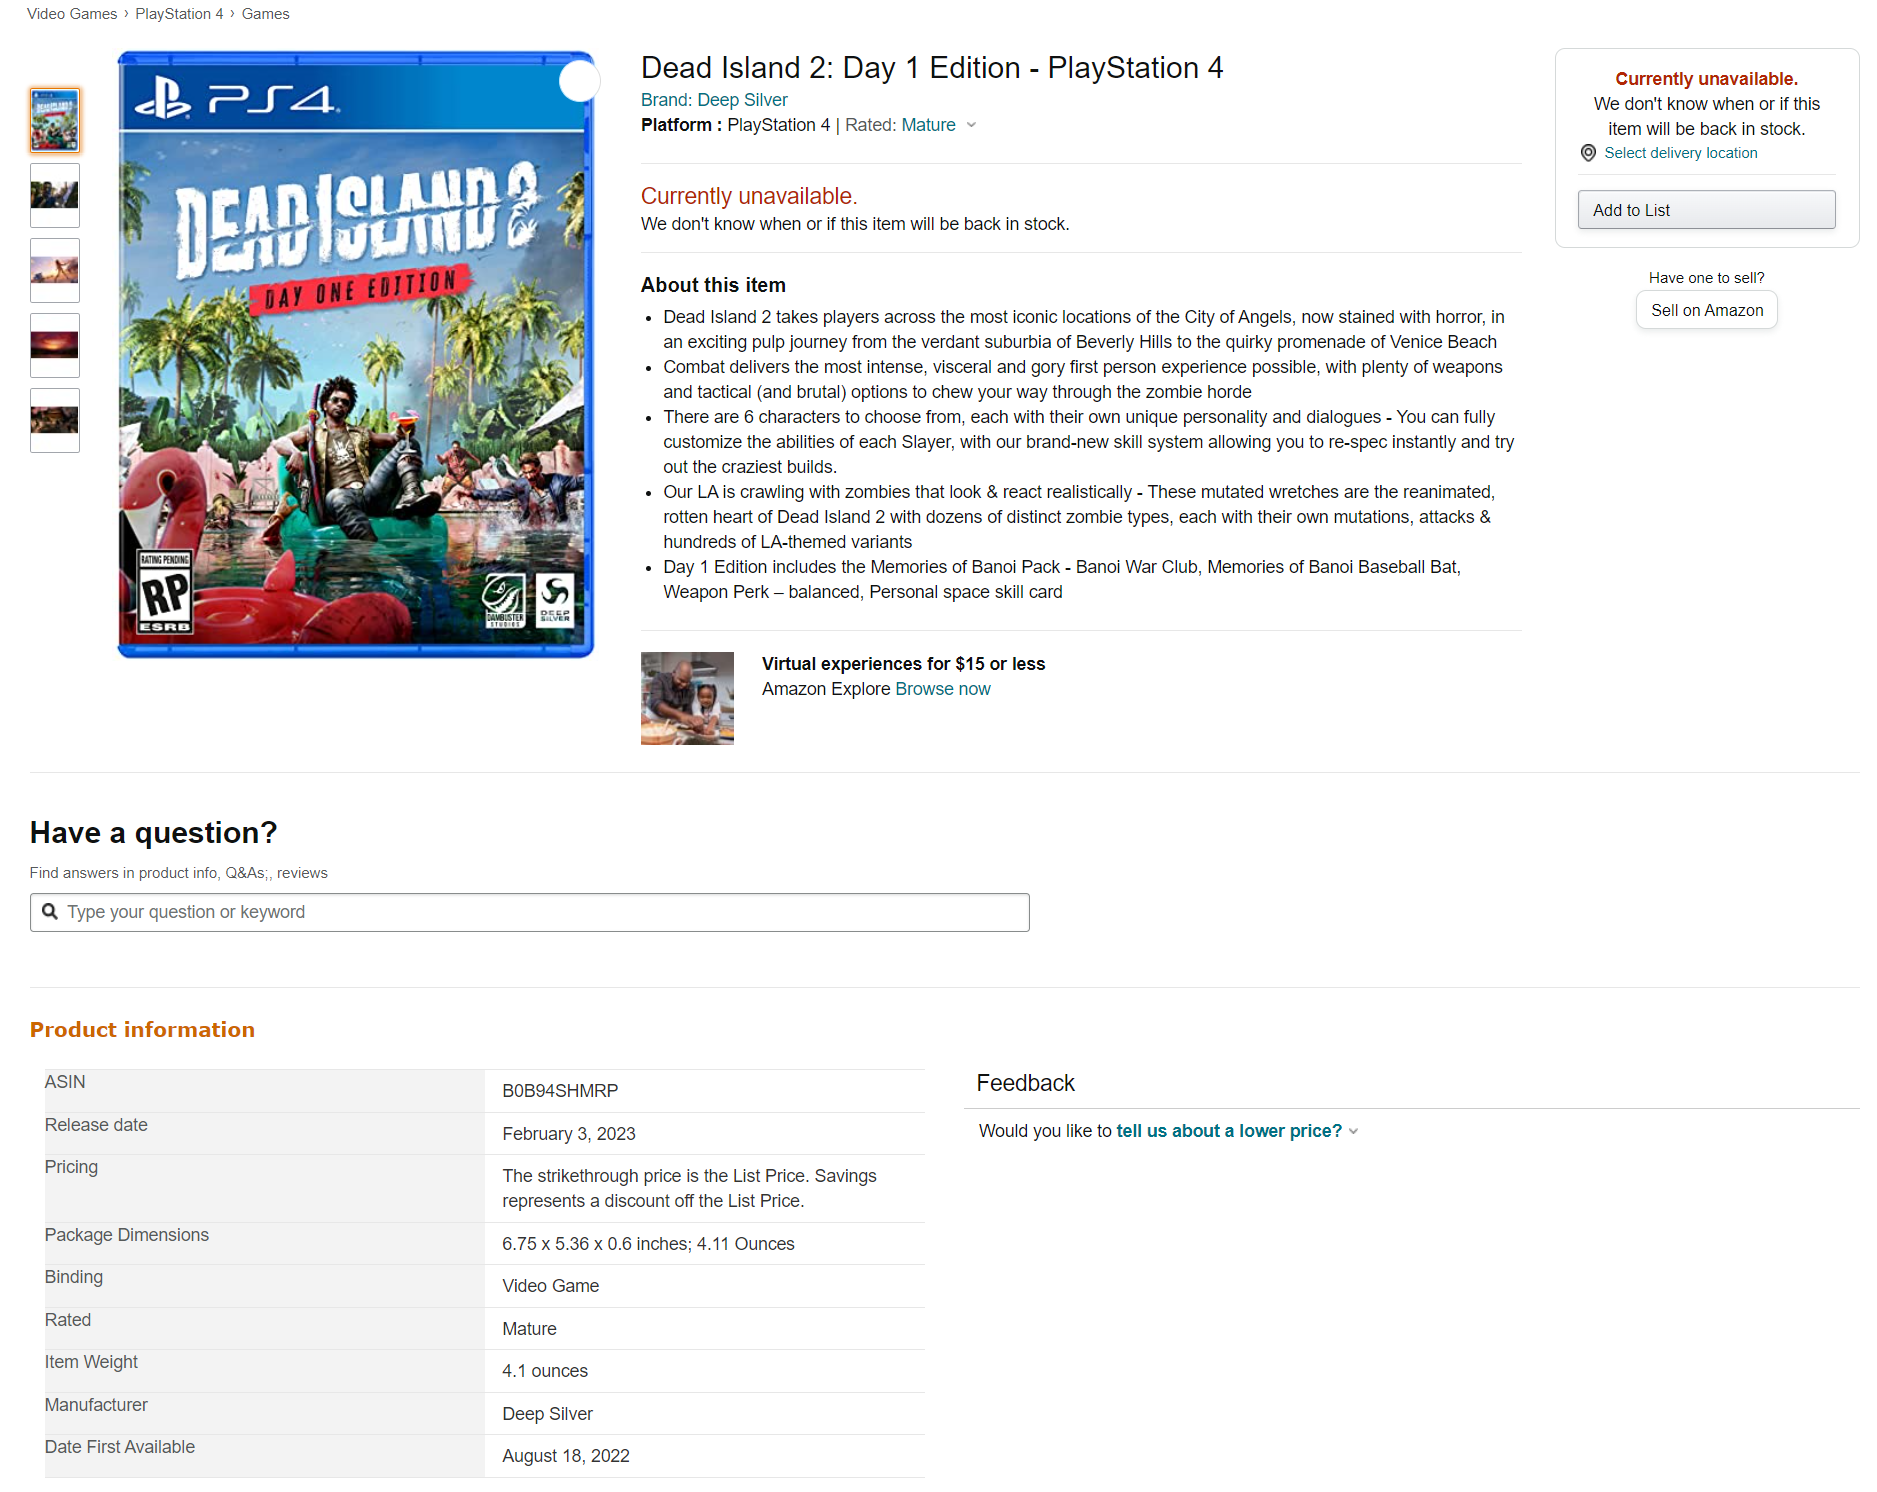 The leaked Amazon product listing for Dead Island 2